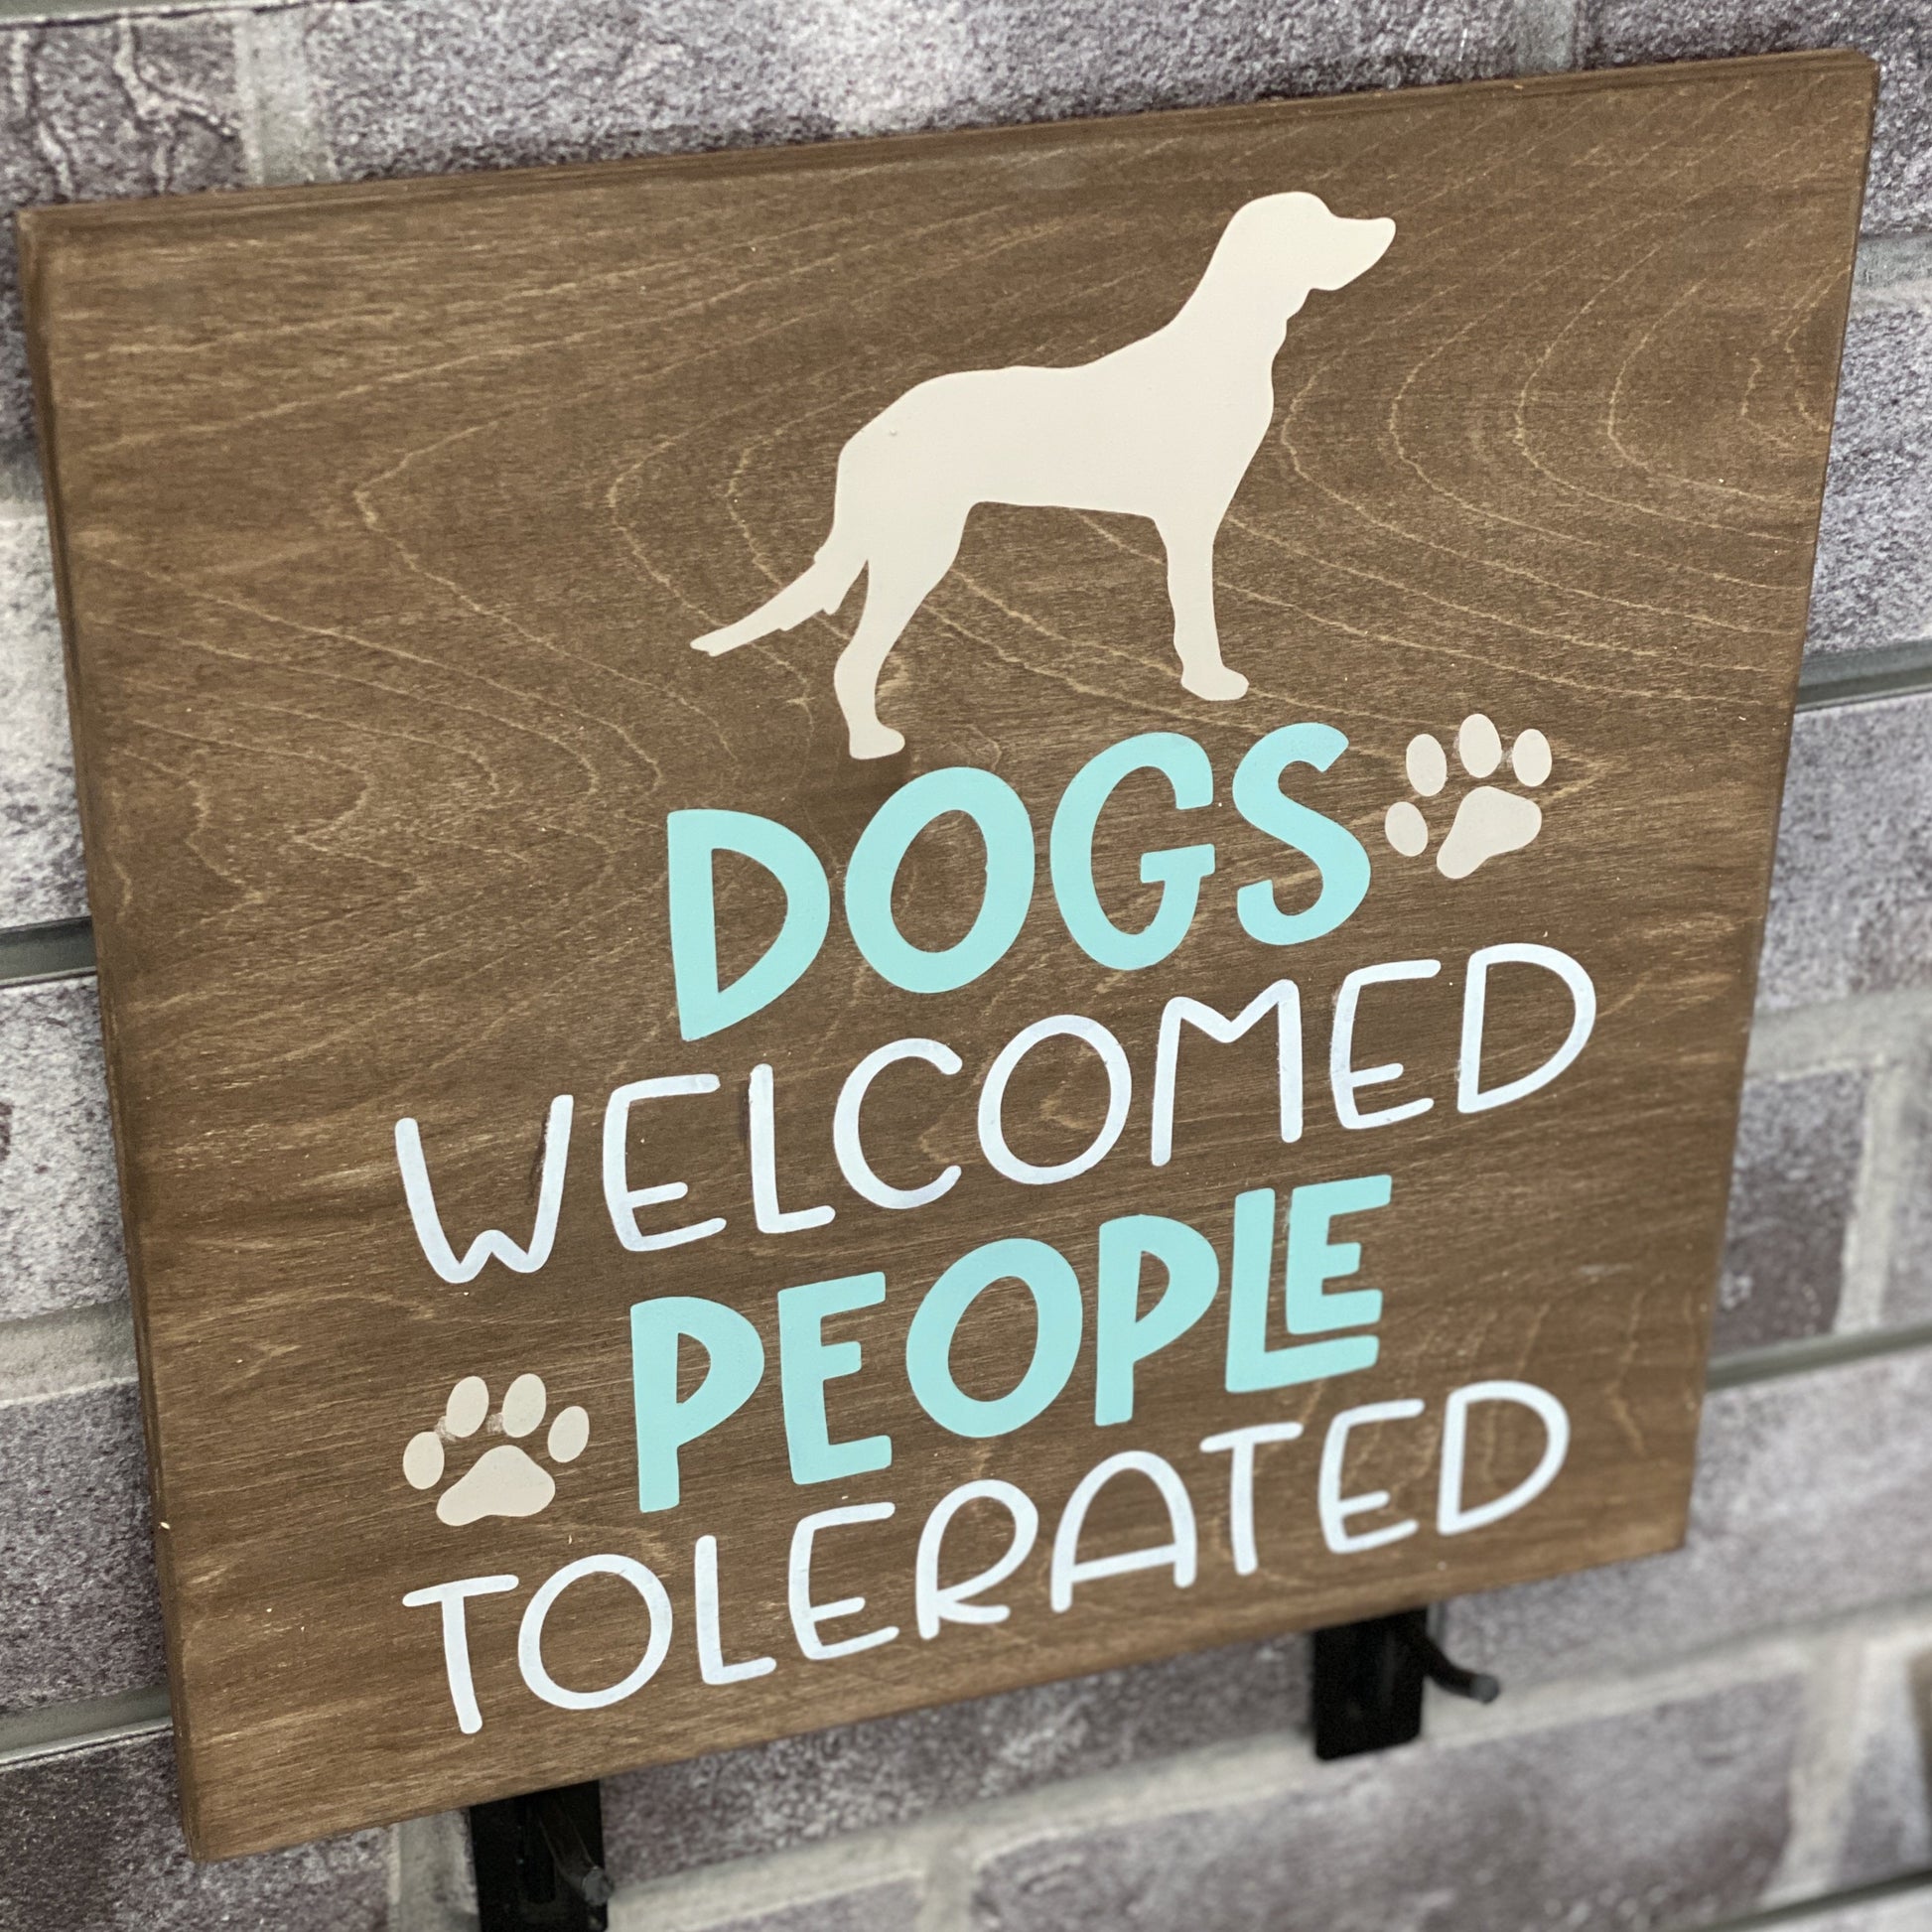 Dogs Welcome People Tolerated: SQUARE DESIGN - Paisley Grace Makery